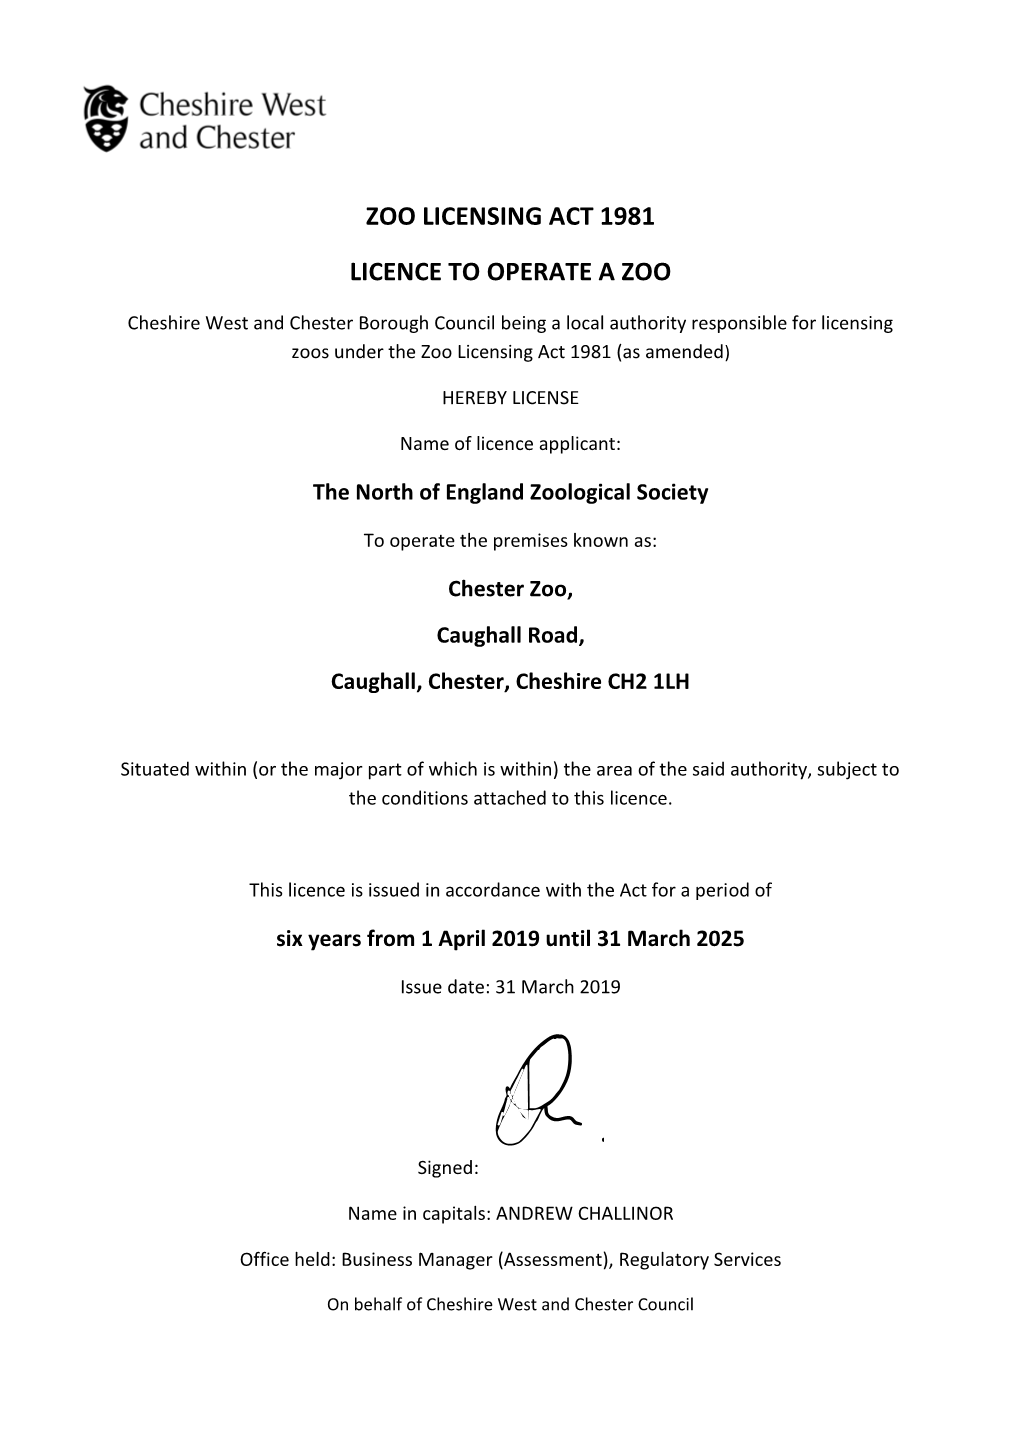 Zoo Licensing Act 1981 Licence to Operate A